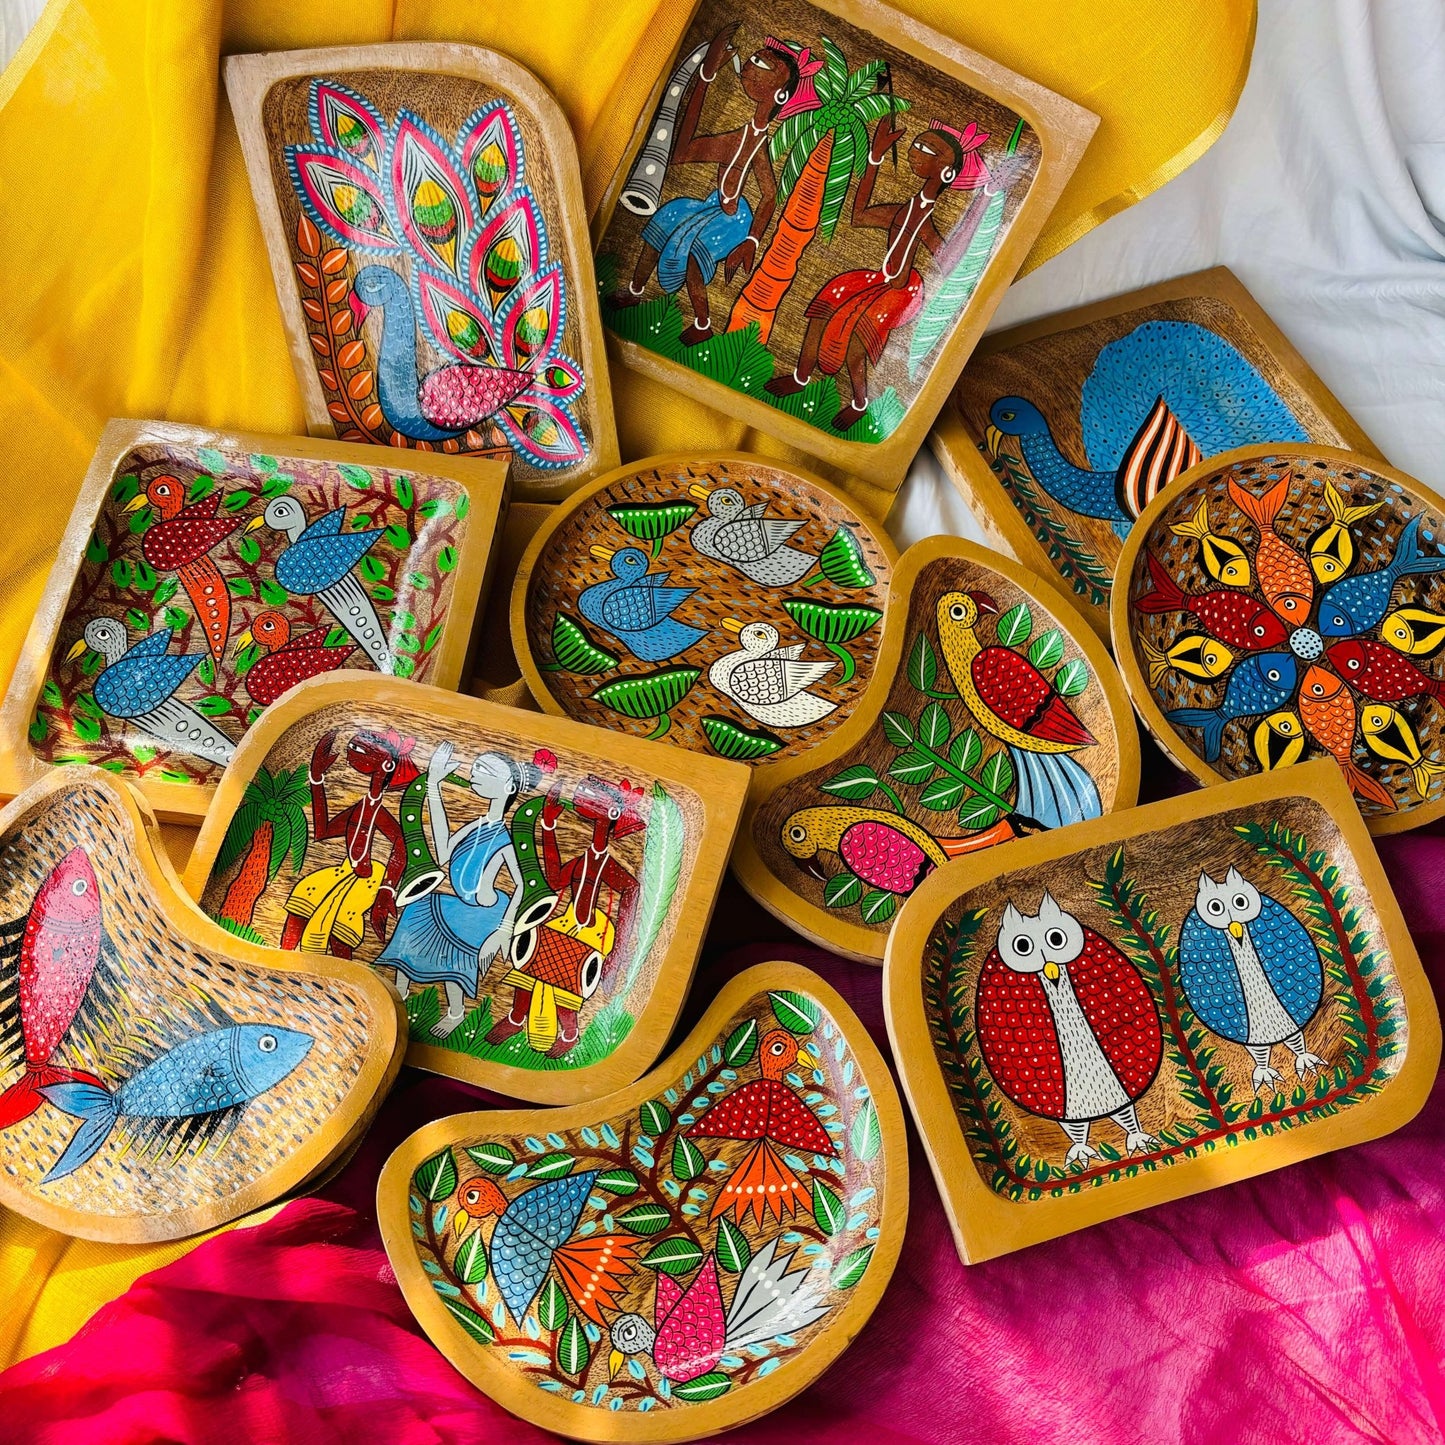 Three round wooden tea trays, two square wood trays, three rectangular wooden trays and three moon-shaped wooden serving trays featuring Indian folk art, West Bengal Pattachitra paintings of four birds, two peacocks, two fish, one owl, and two tribal motifs, inspired from Indian folklore